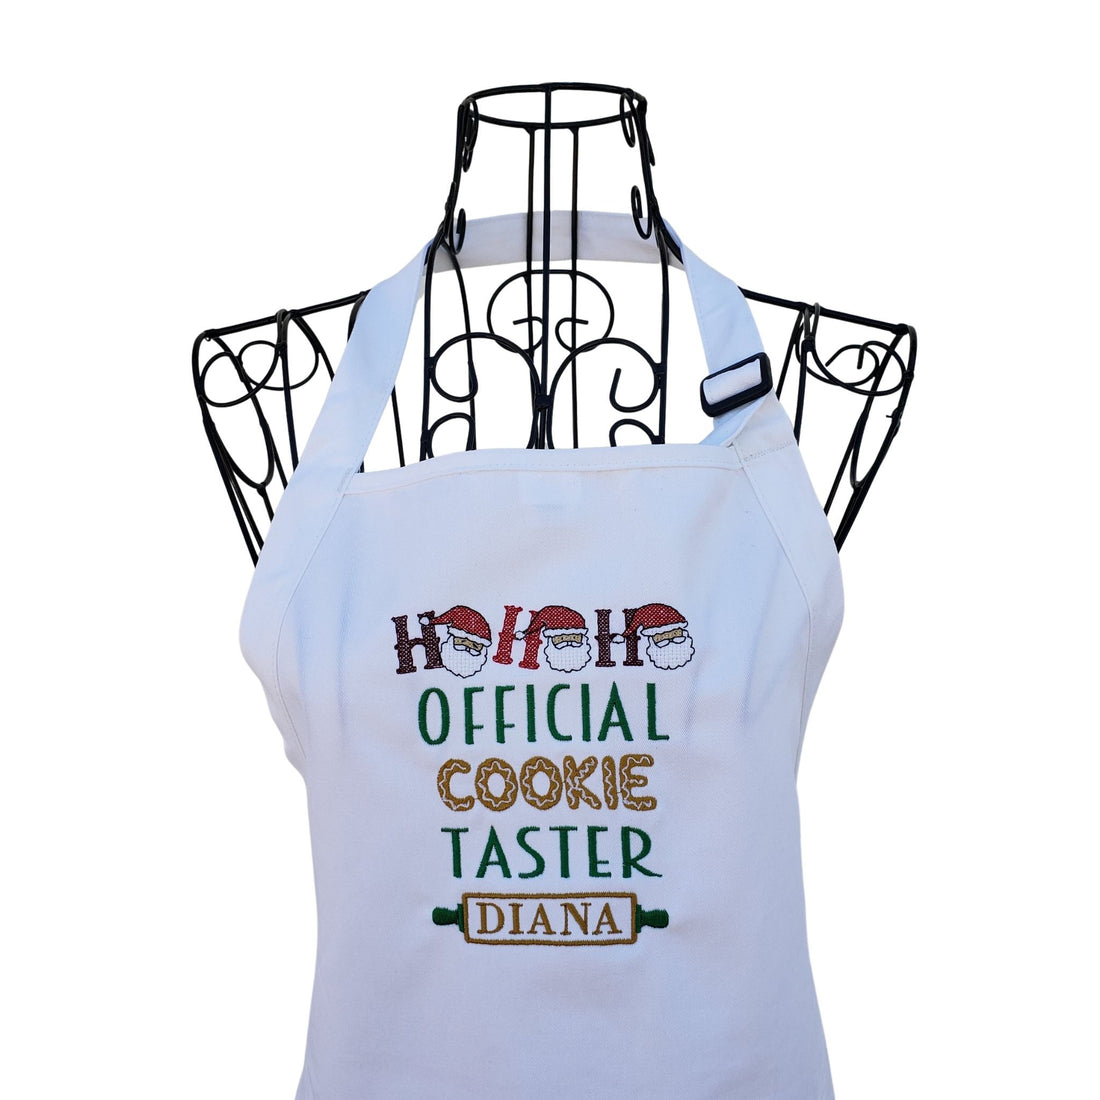 Personalized Official Cookie Taster embroidered apron - Life Has Just Begun